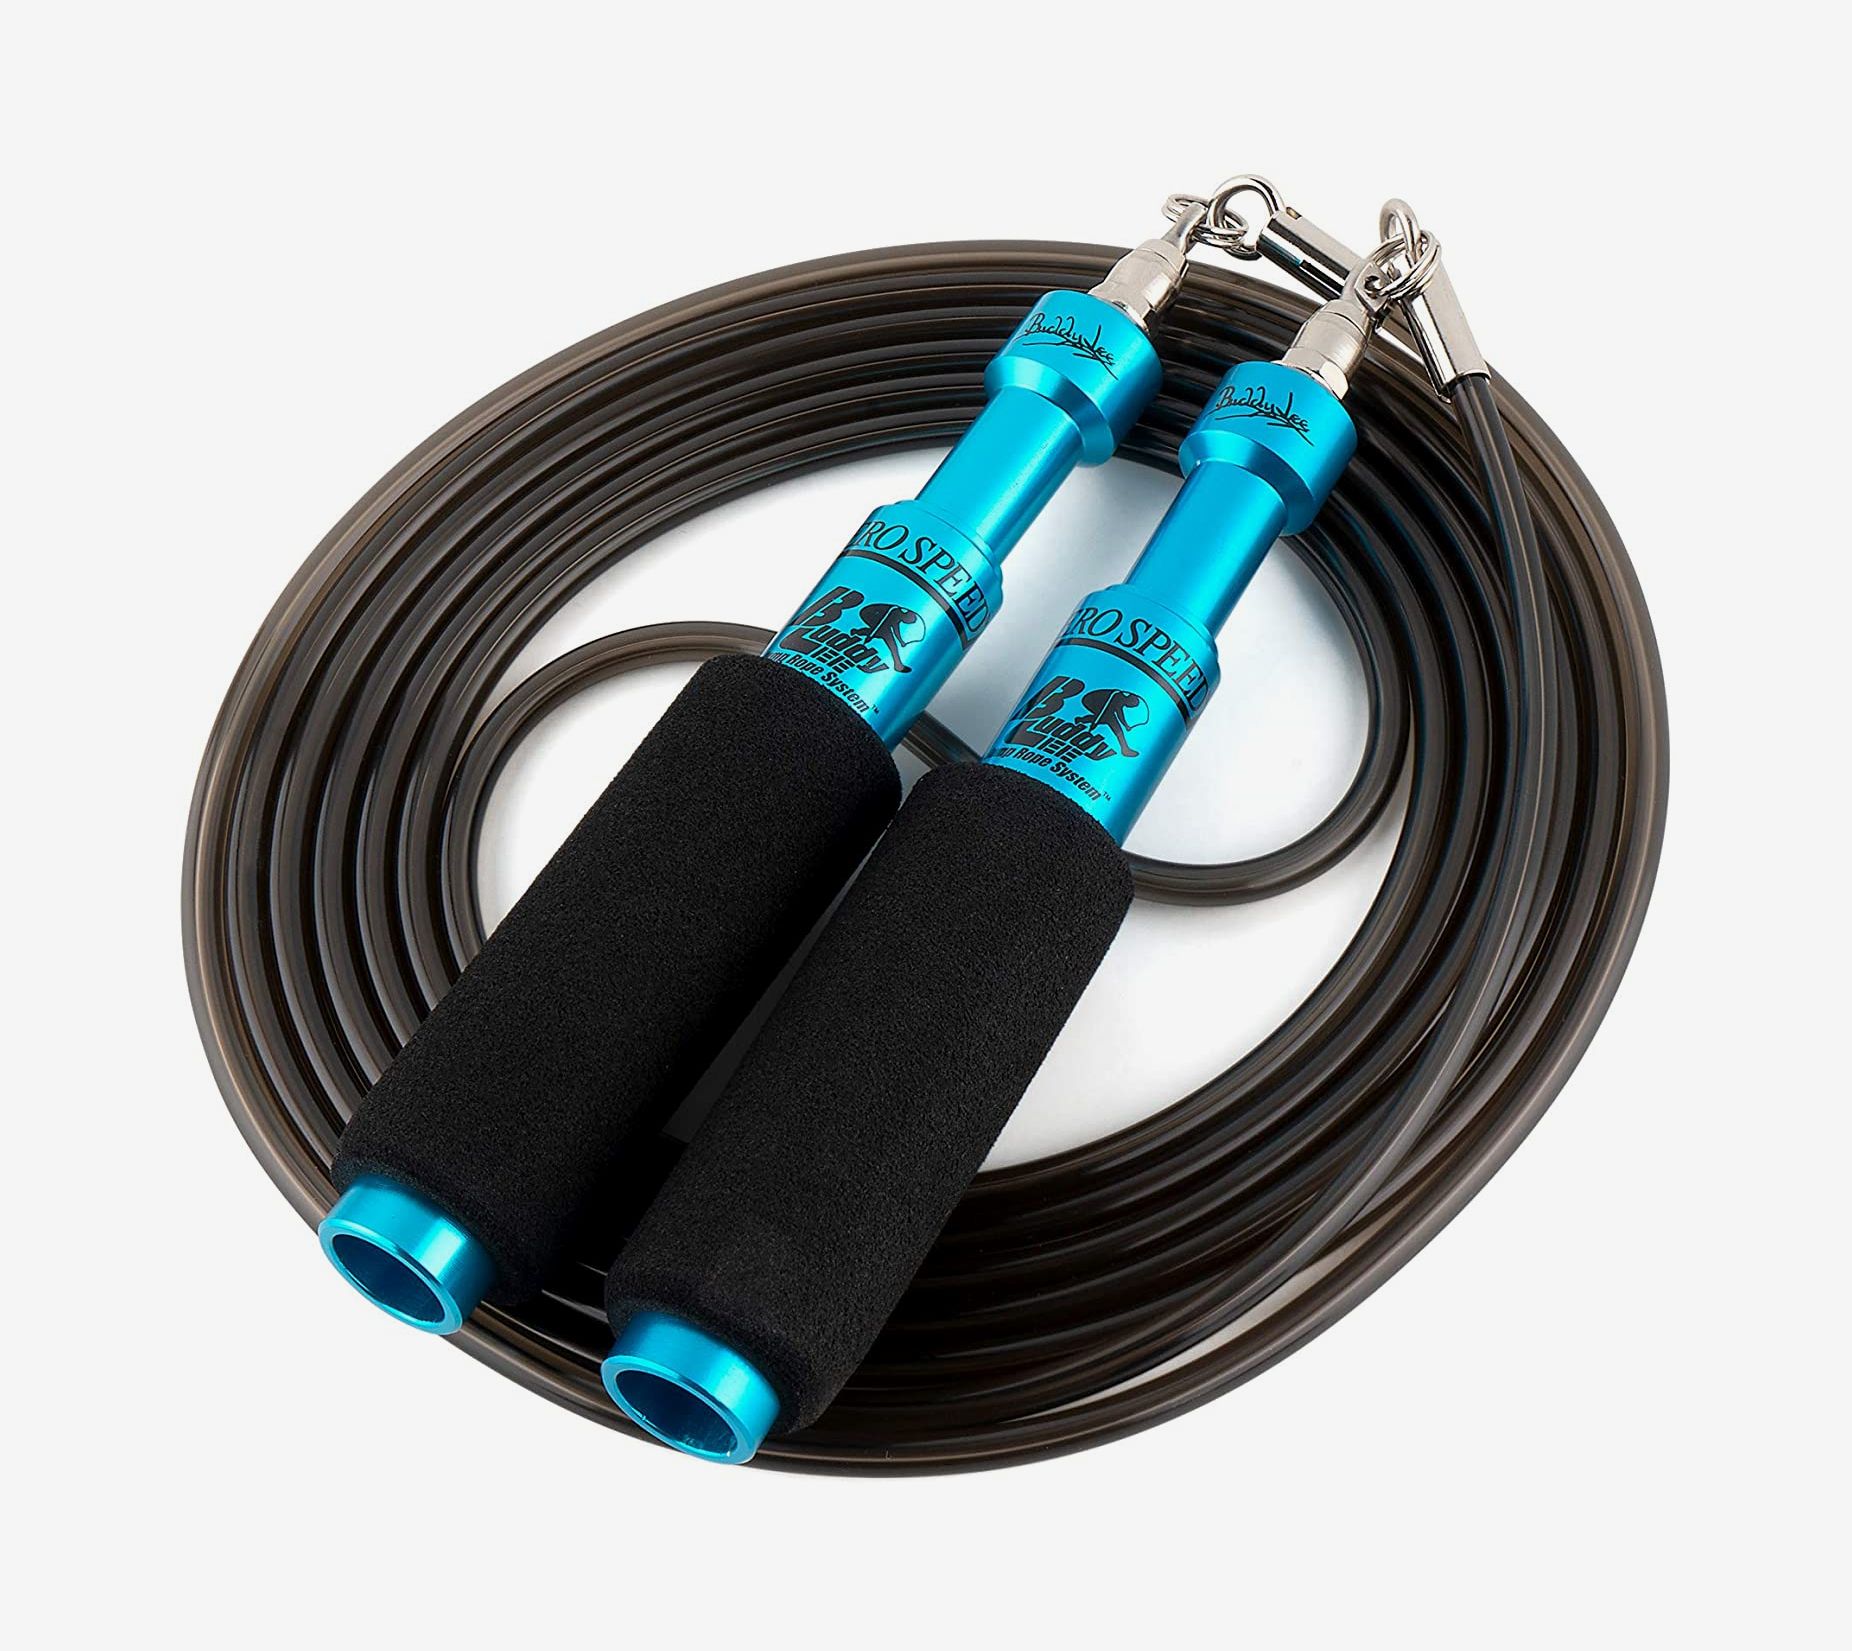 Buddy LeeAero Speed Jump Rope with Green Hornet CableBlackBest Quality 